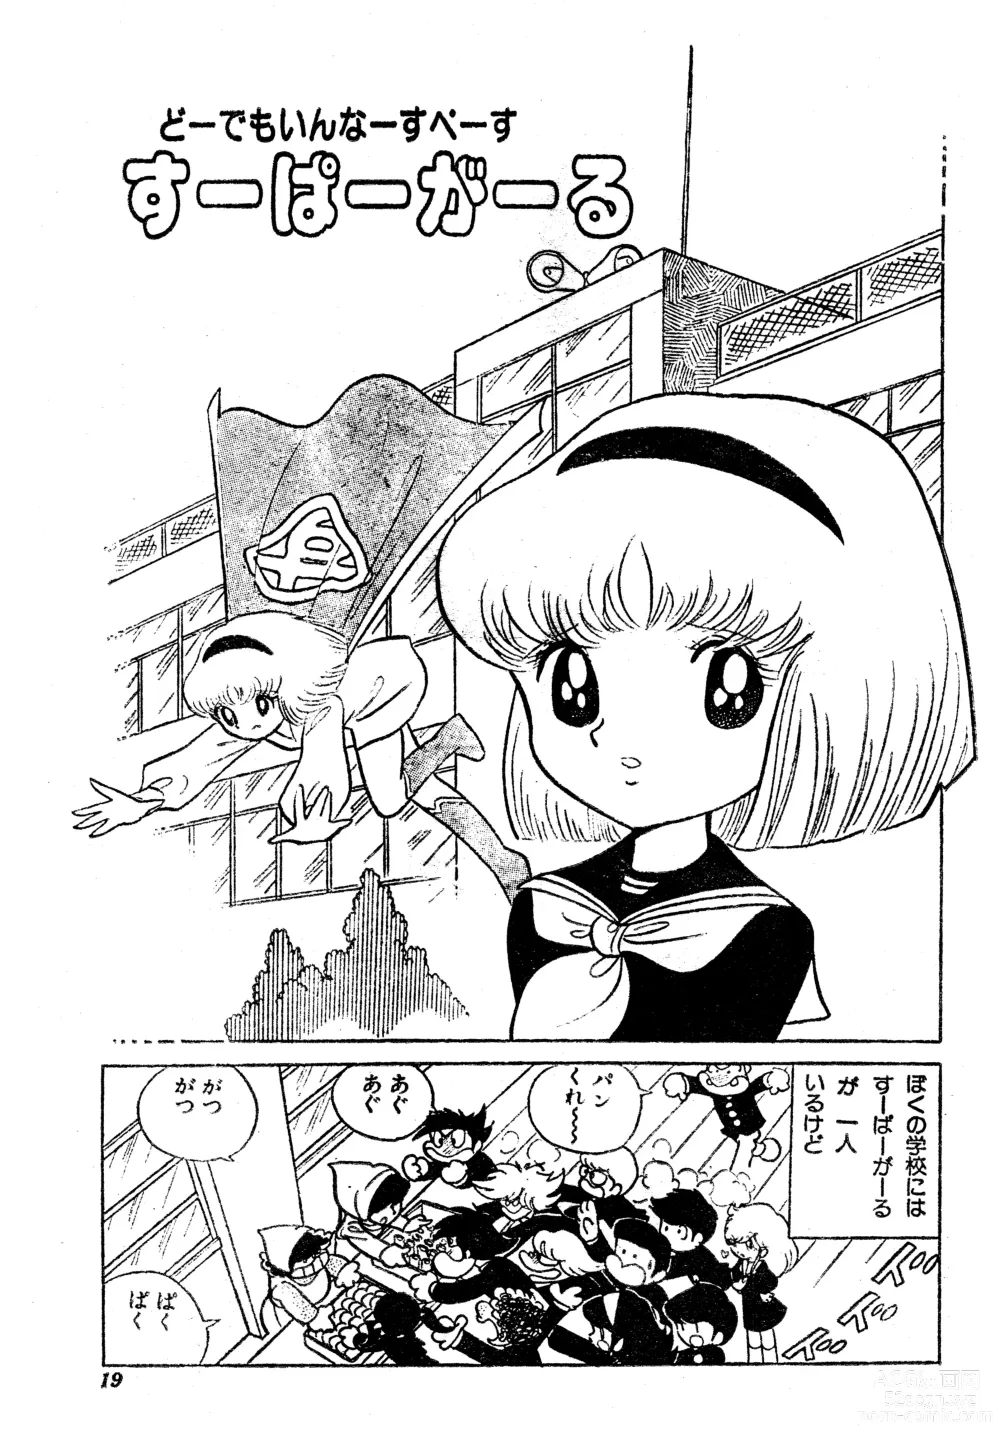 Page 18 of manga Dodemo inner space